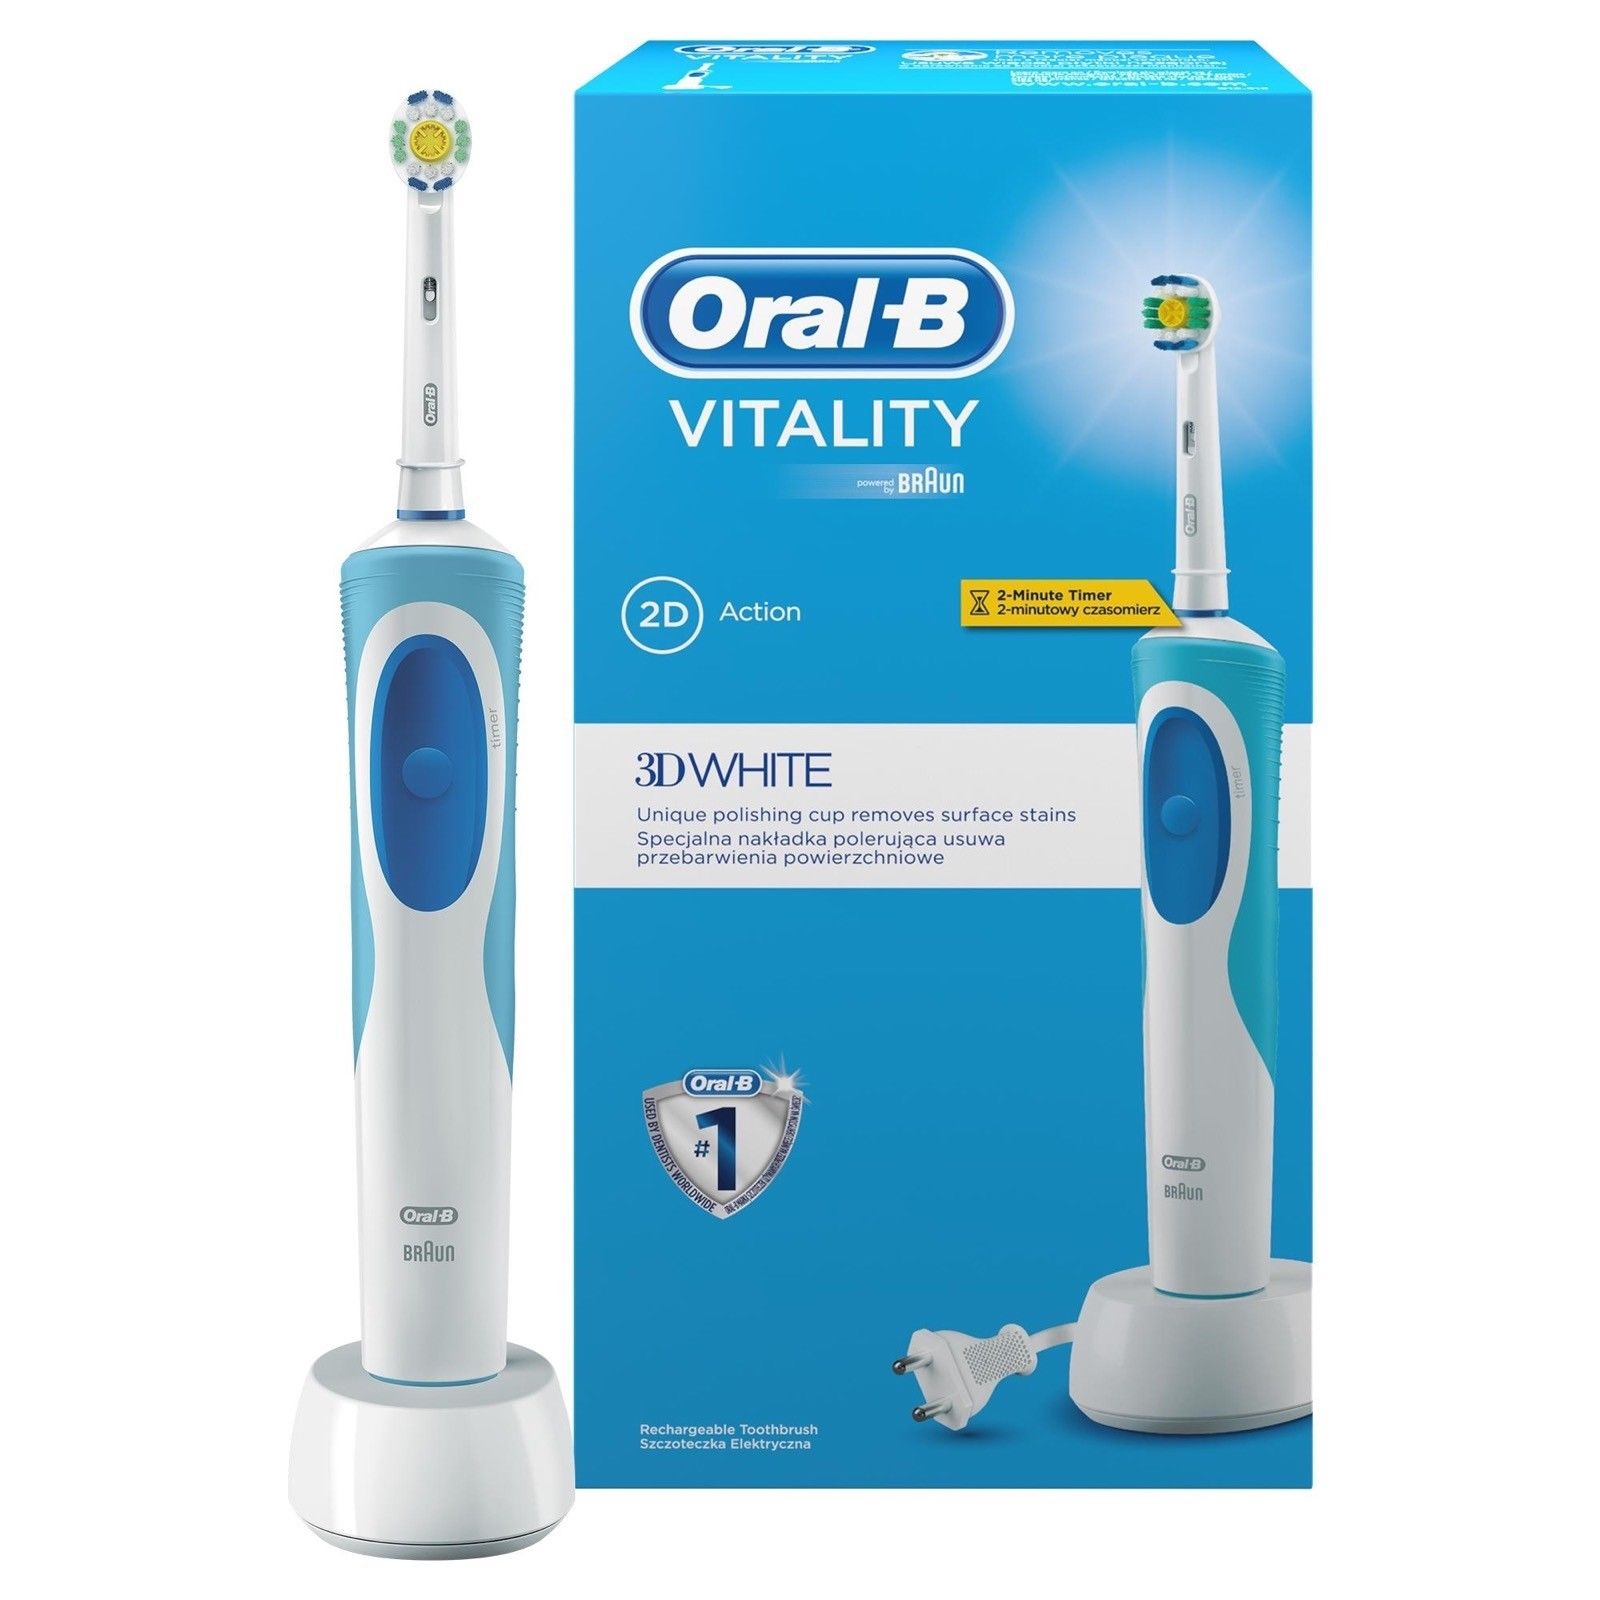 Braun Oral-B Vitality 3D Mains Rechargeable Electric Toothbrush with Charging Dock